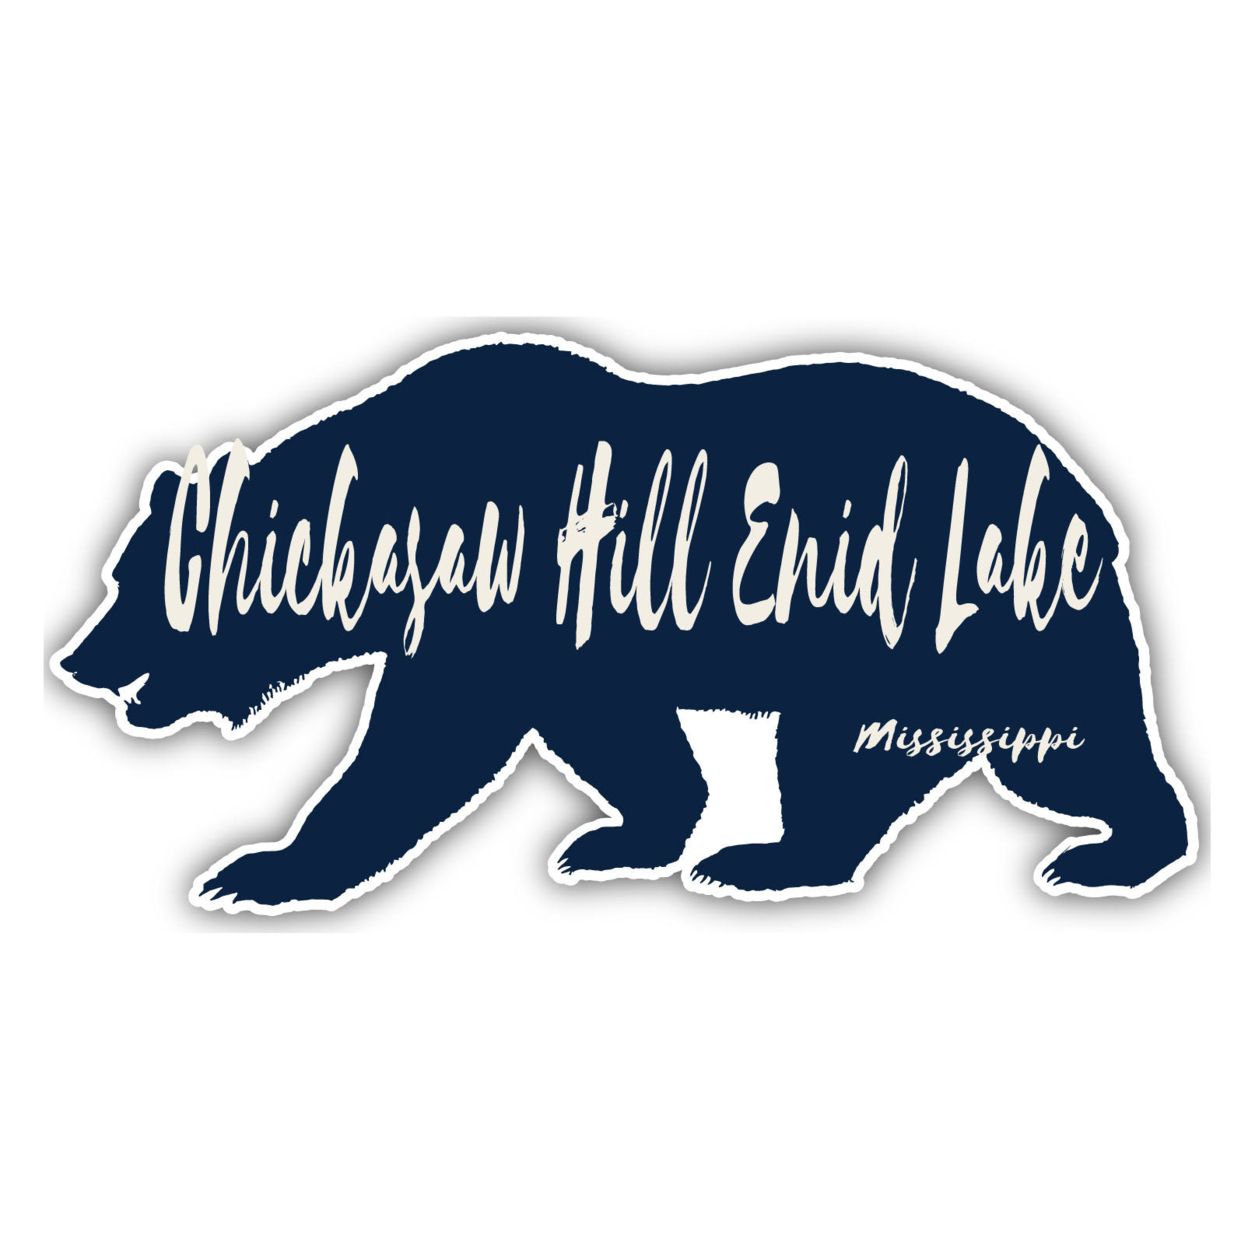 Chickasaw Hill Enid Lake Mississippi Souvenir Decorative Stickers (Choose Theme And Size) - 4-Pack, 8-Inch, Bear